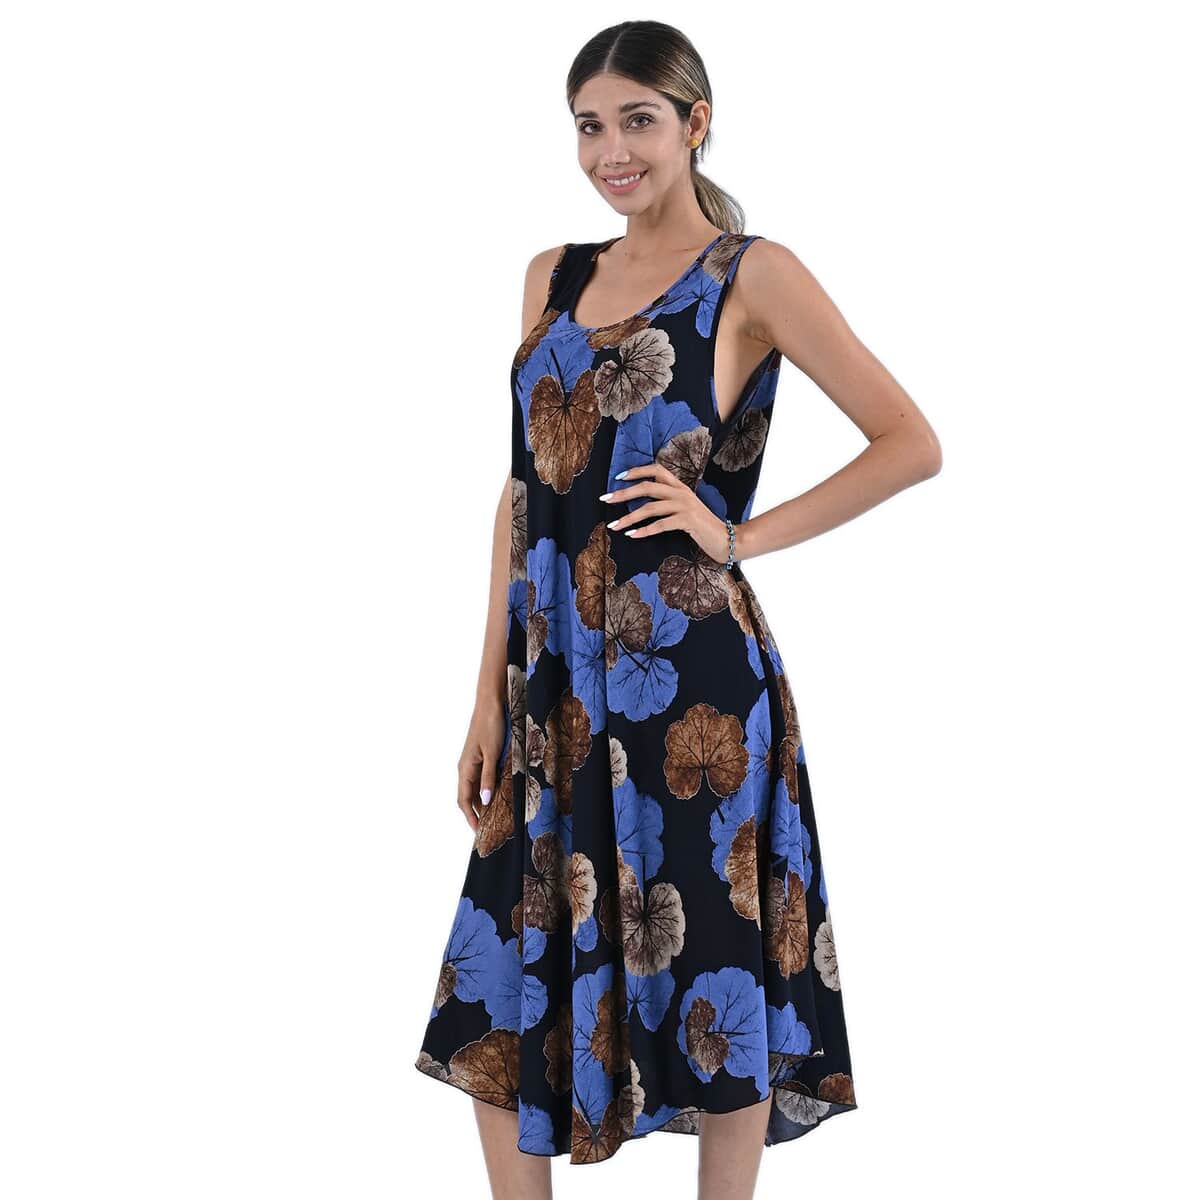 TAMSY Blue Leaf Print Sleeveless A-Line Dress - One Size Fits Most (24"x41") image number 2